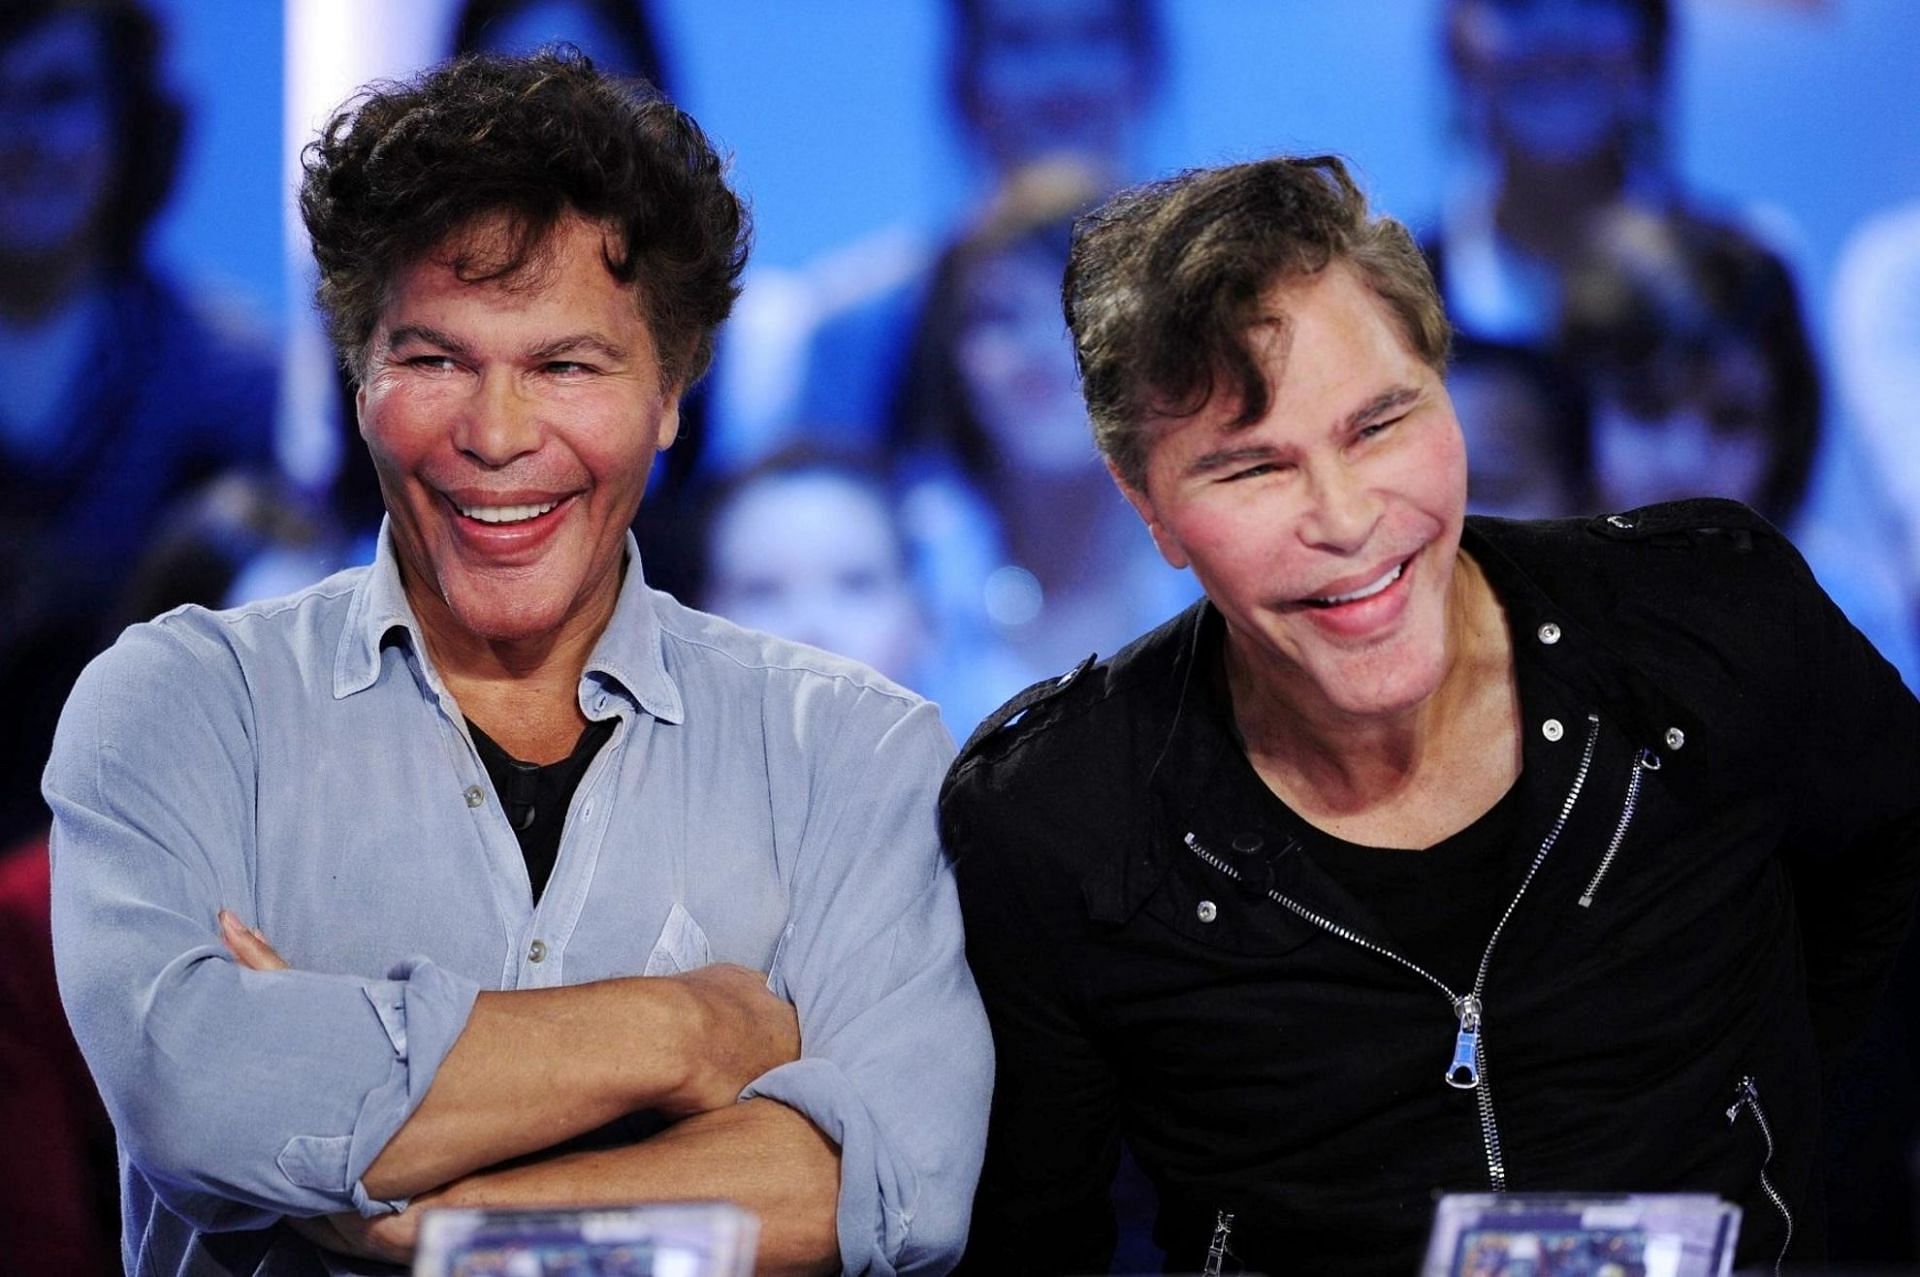 The Bogdanoff Twins, Igor and Grichika (Image via Fred Dufour/AFP/Getty Images)